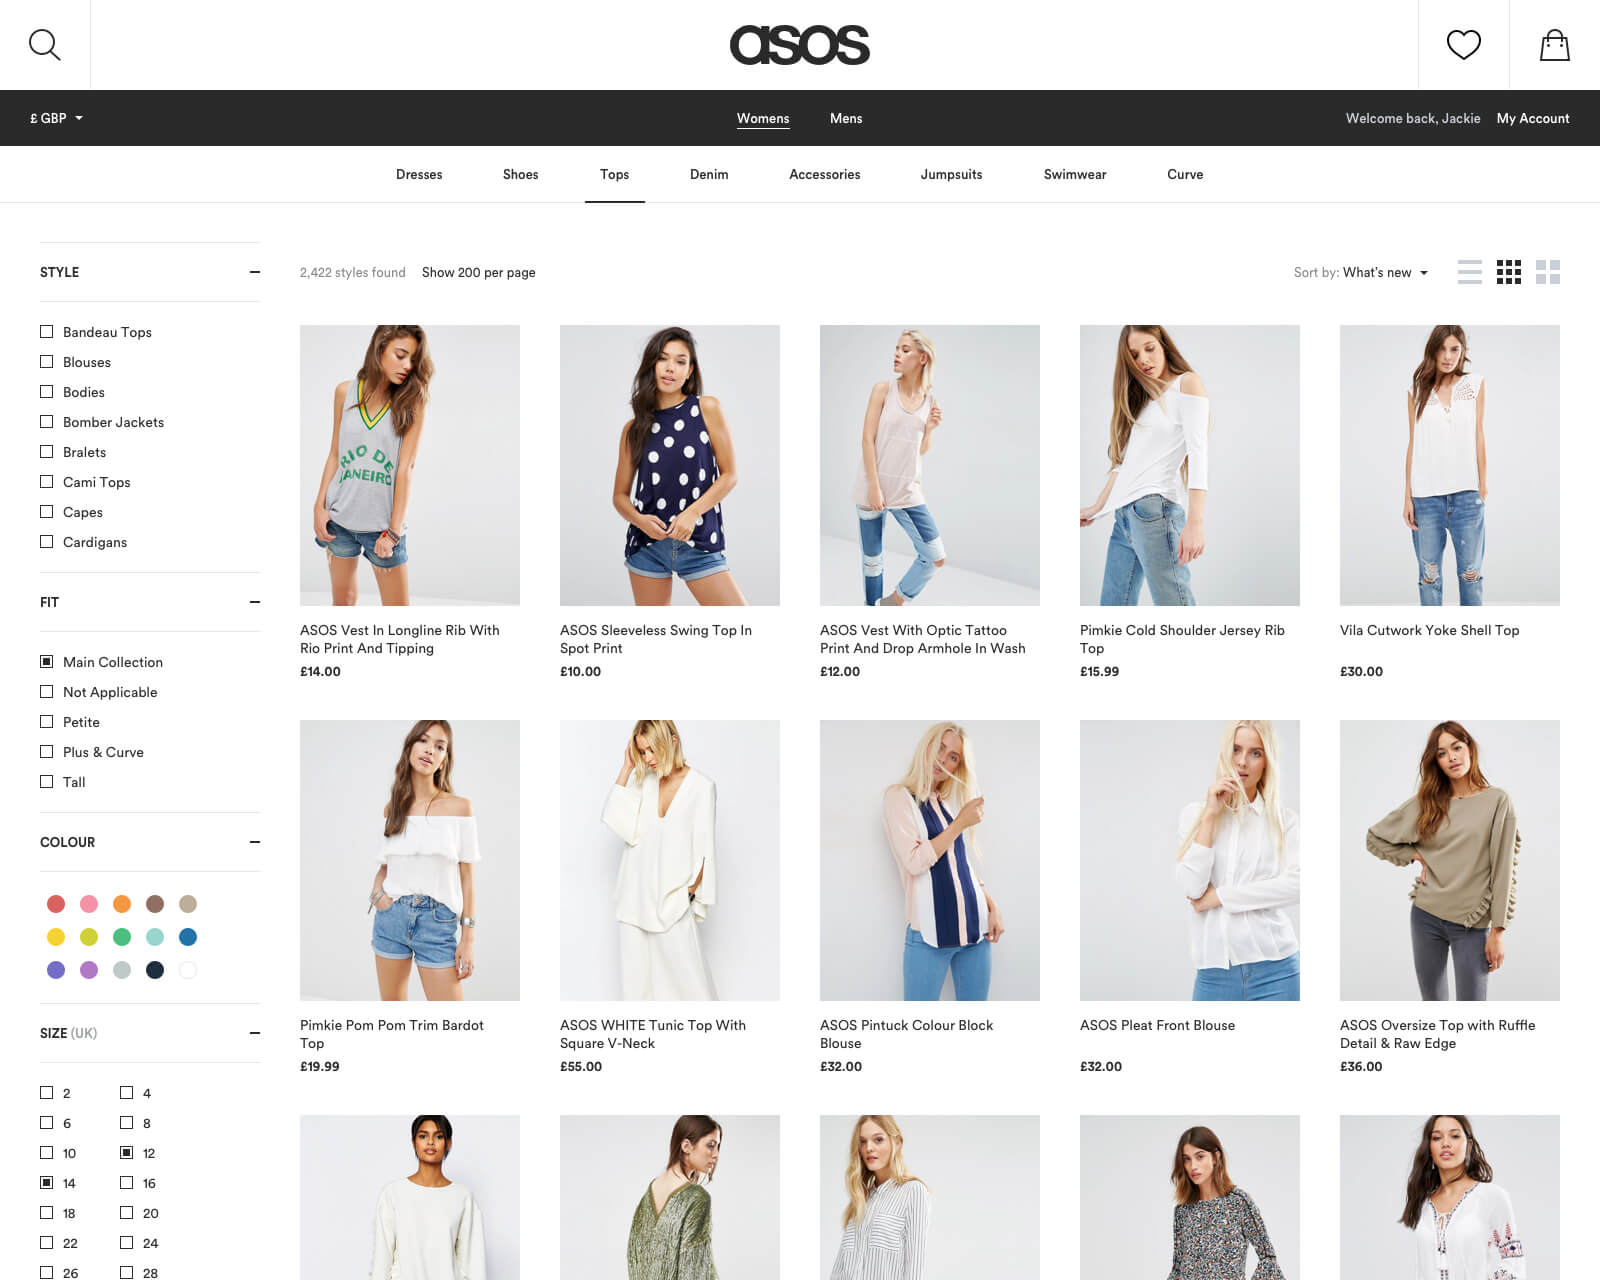 A mockup of the ASOS product page. The design shows results for women's tops.